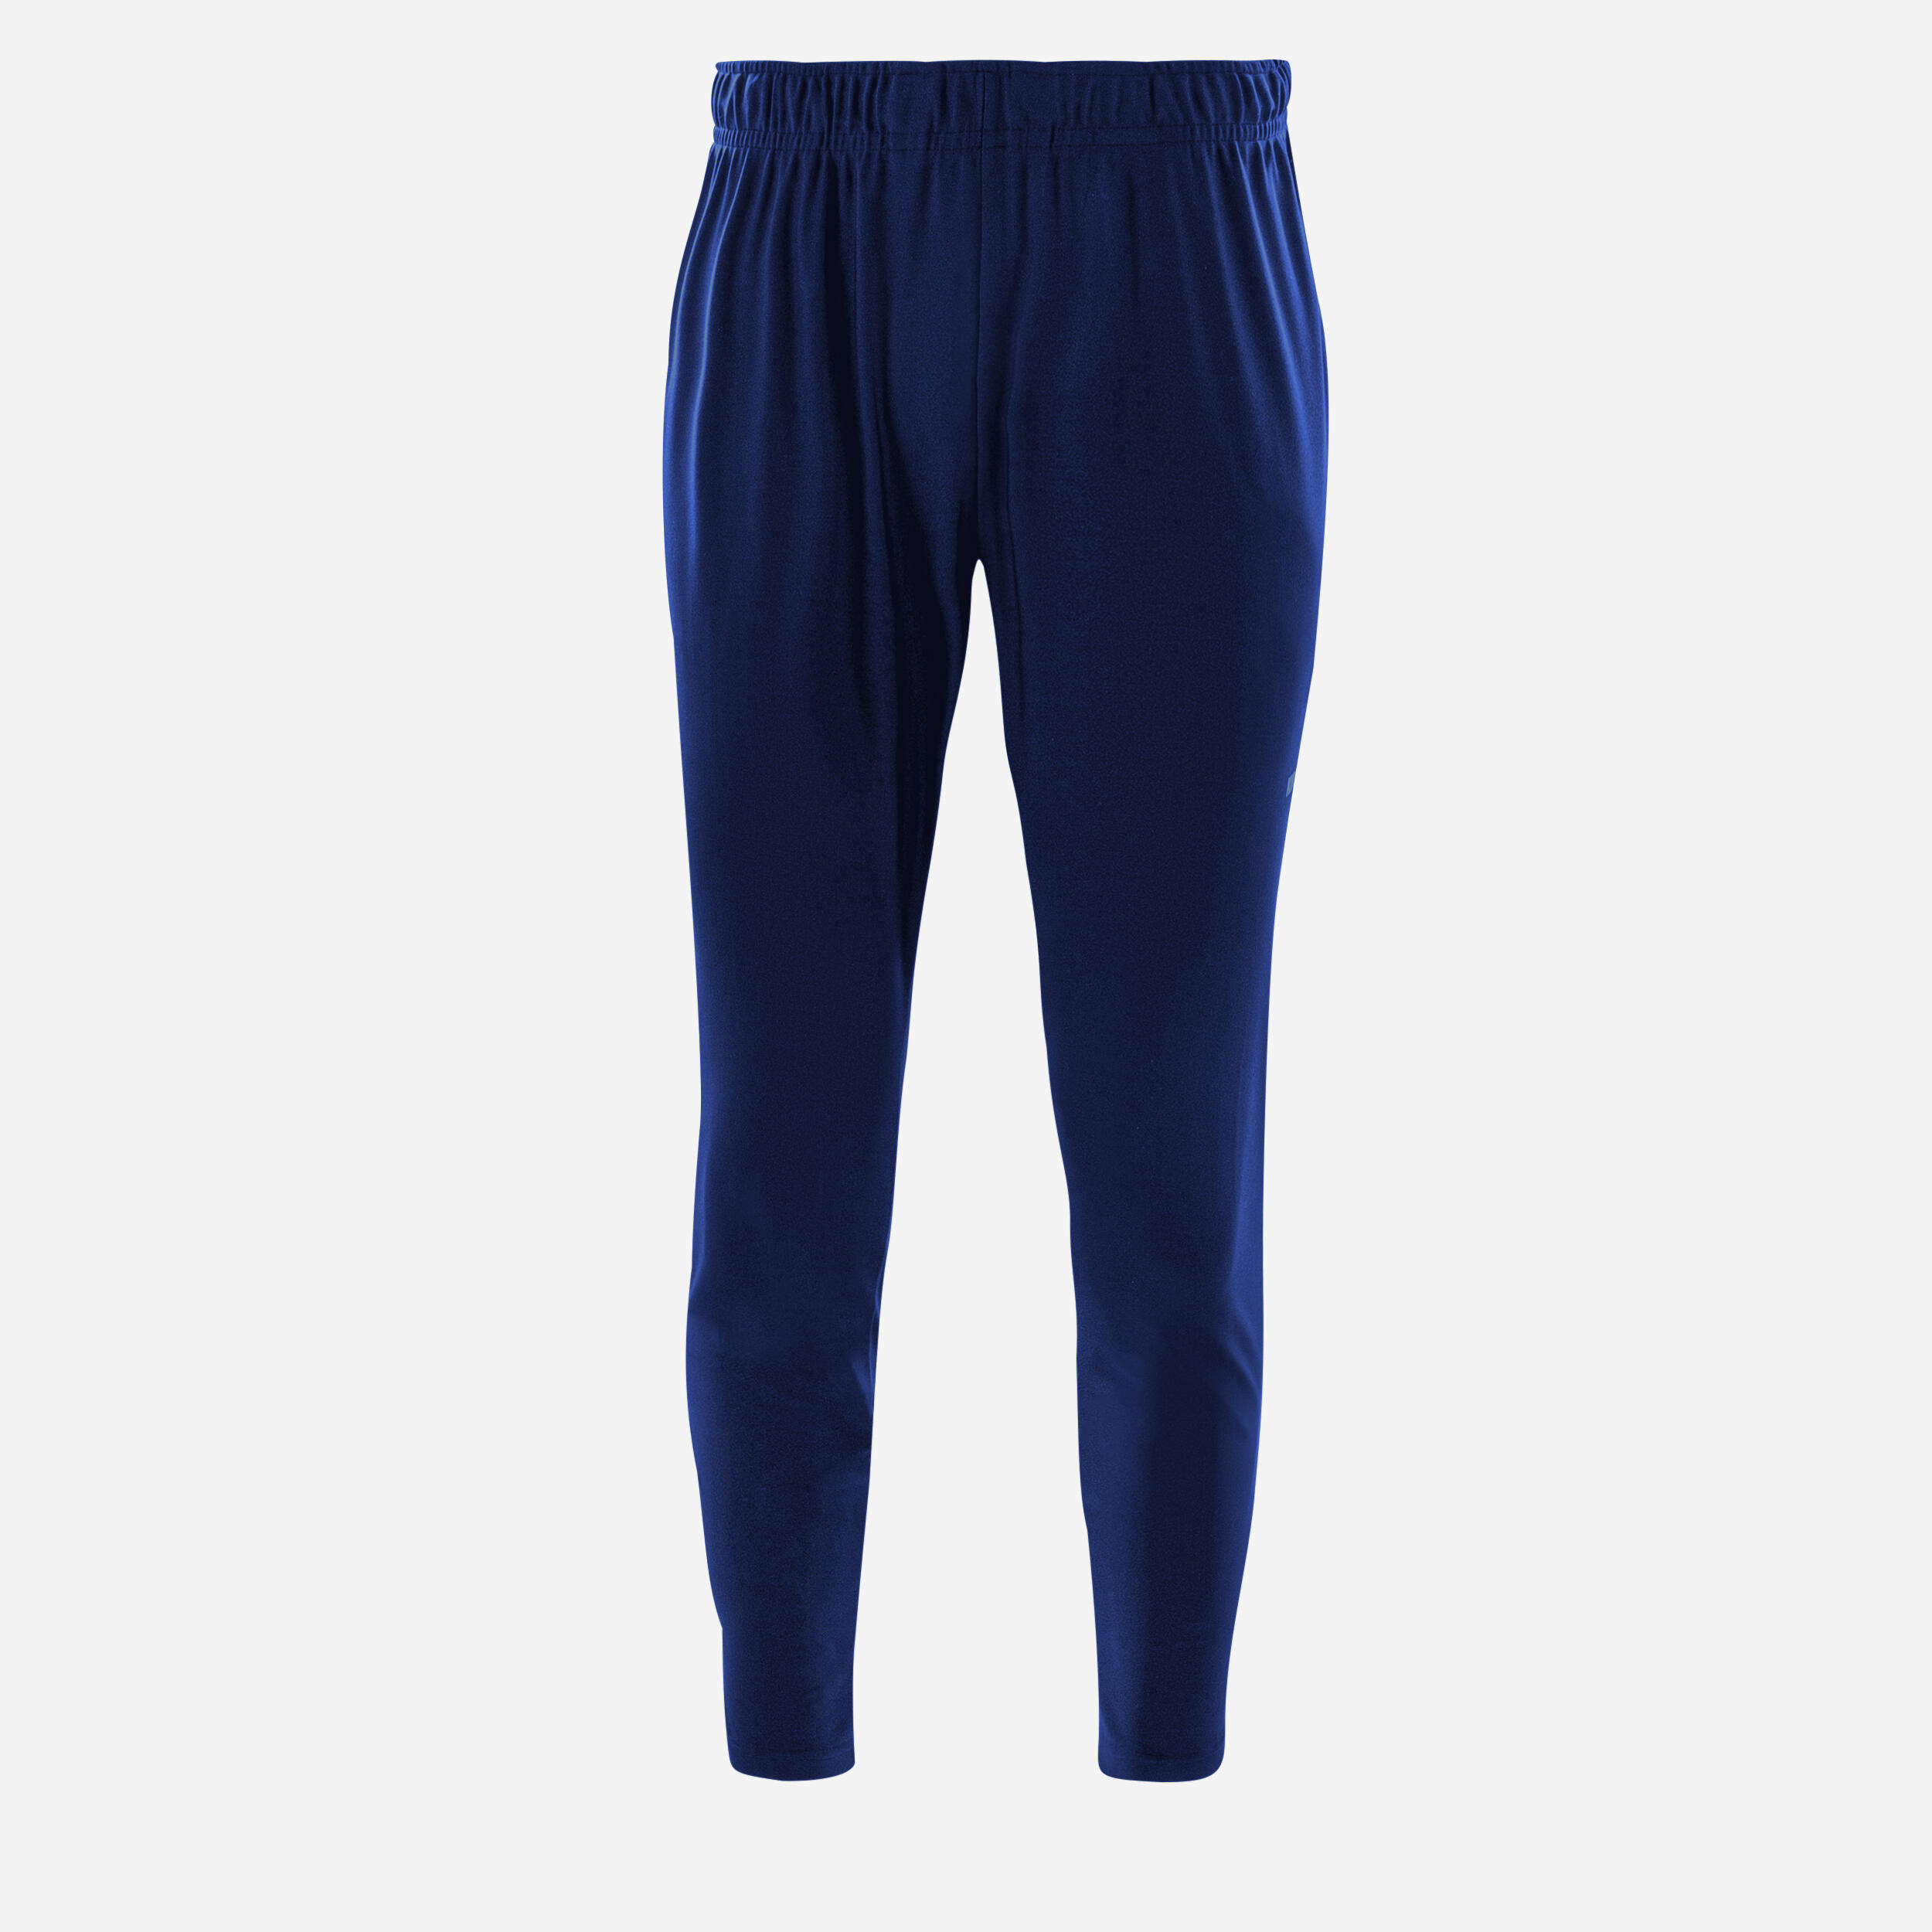 India Football Academy Jersey Stoles Track Trousers - Buy India Football  Academy Jersey Stoles Track Trousers online in India